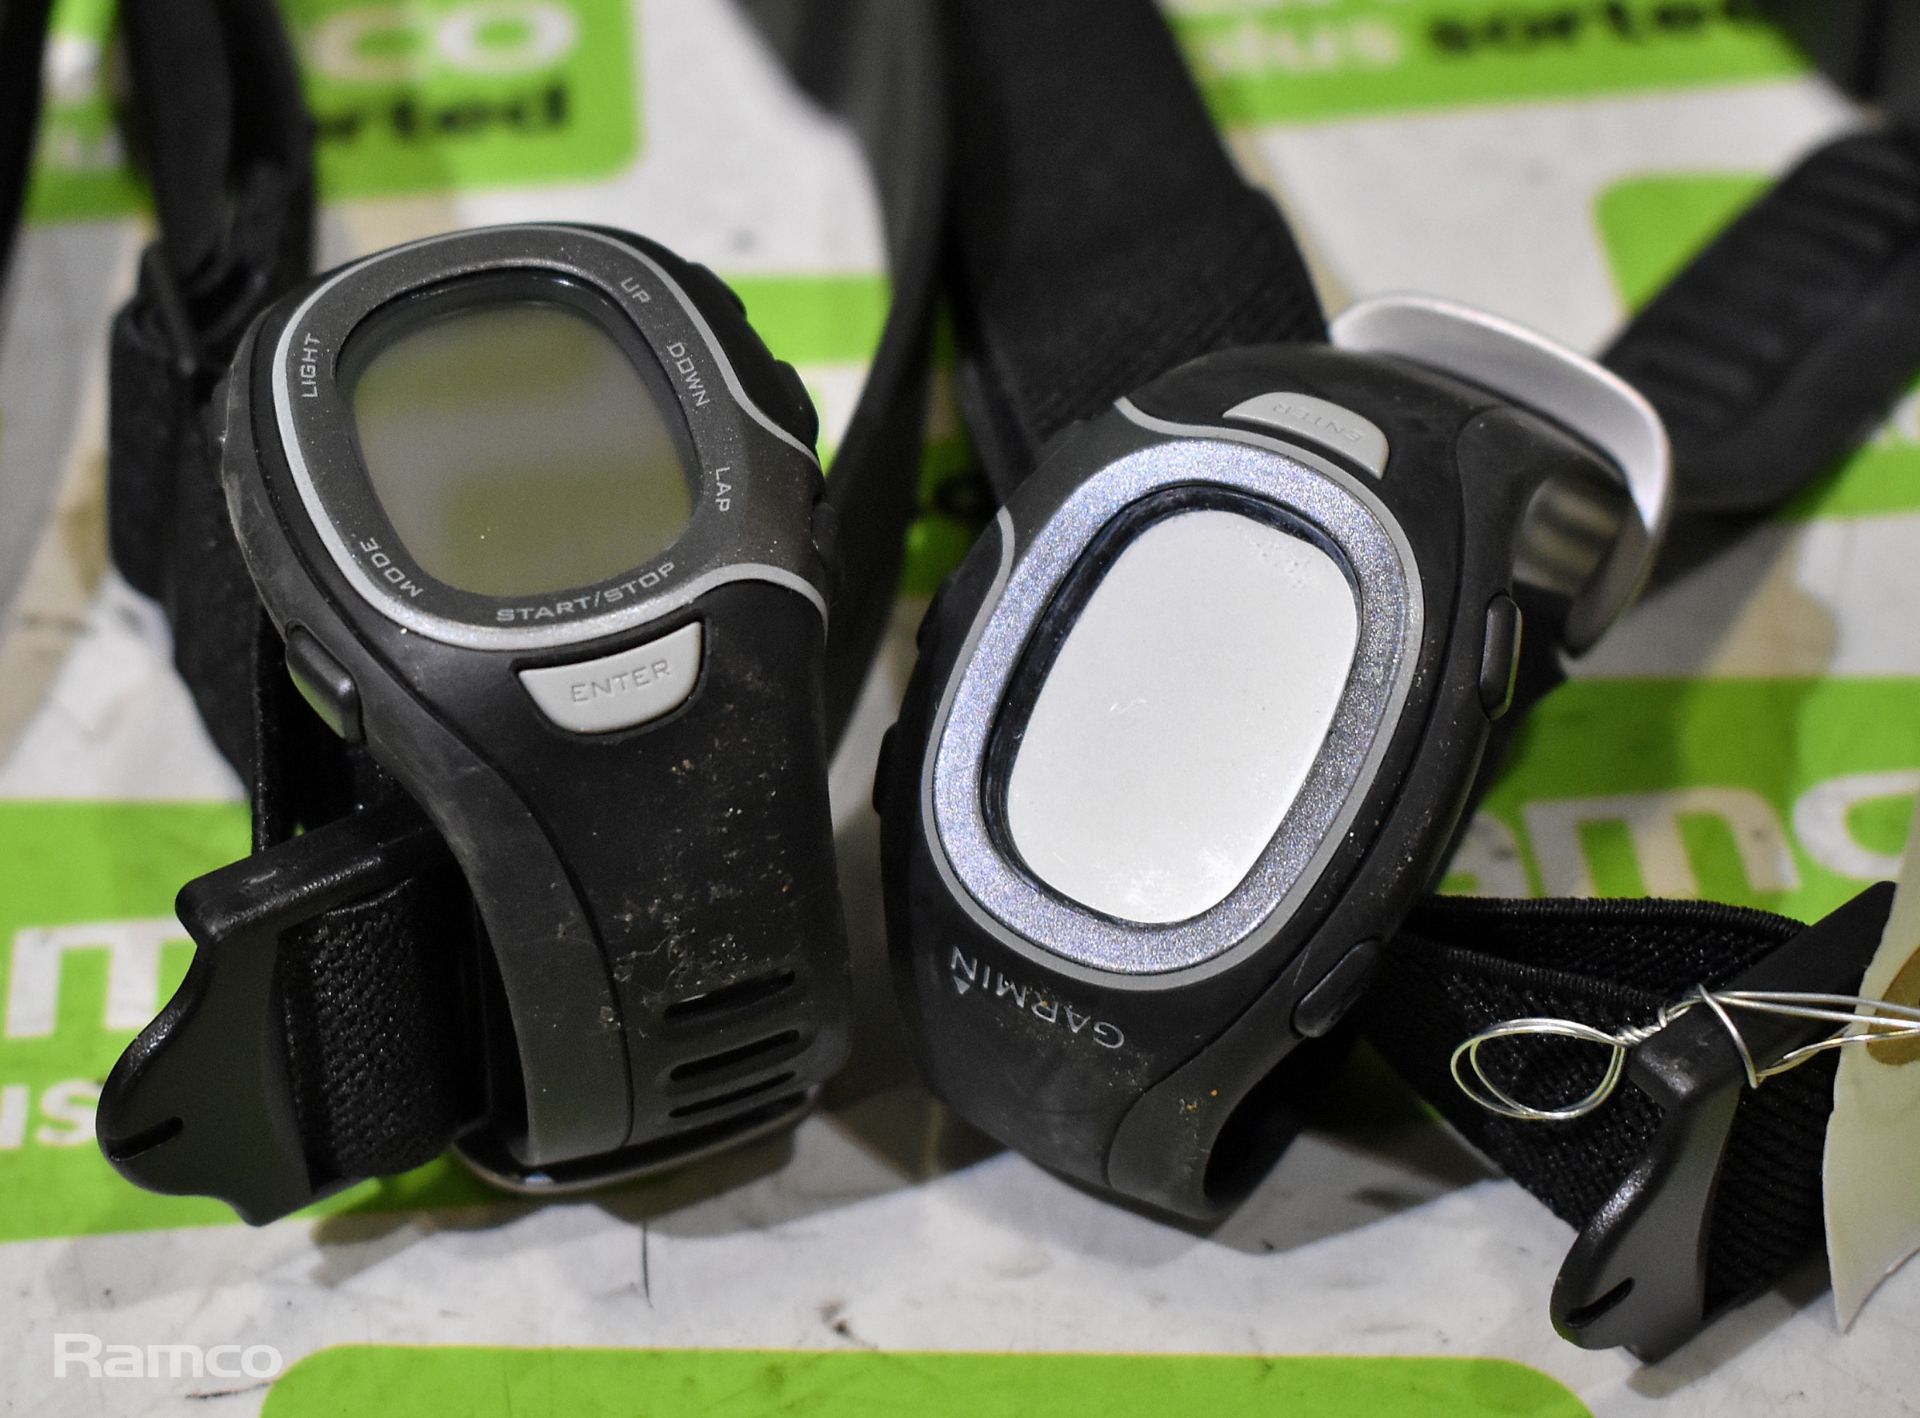 5x Garmin FR60M Heart rate monitor watches and chest straps - Image 3 of 6